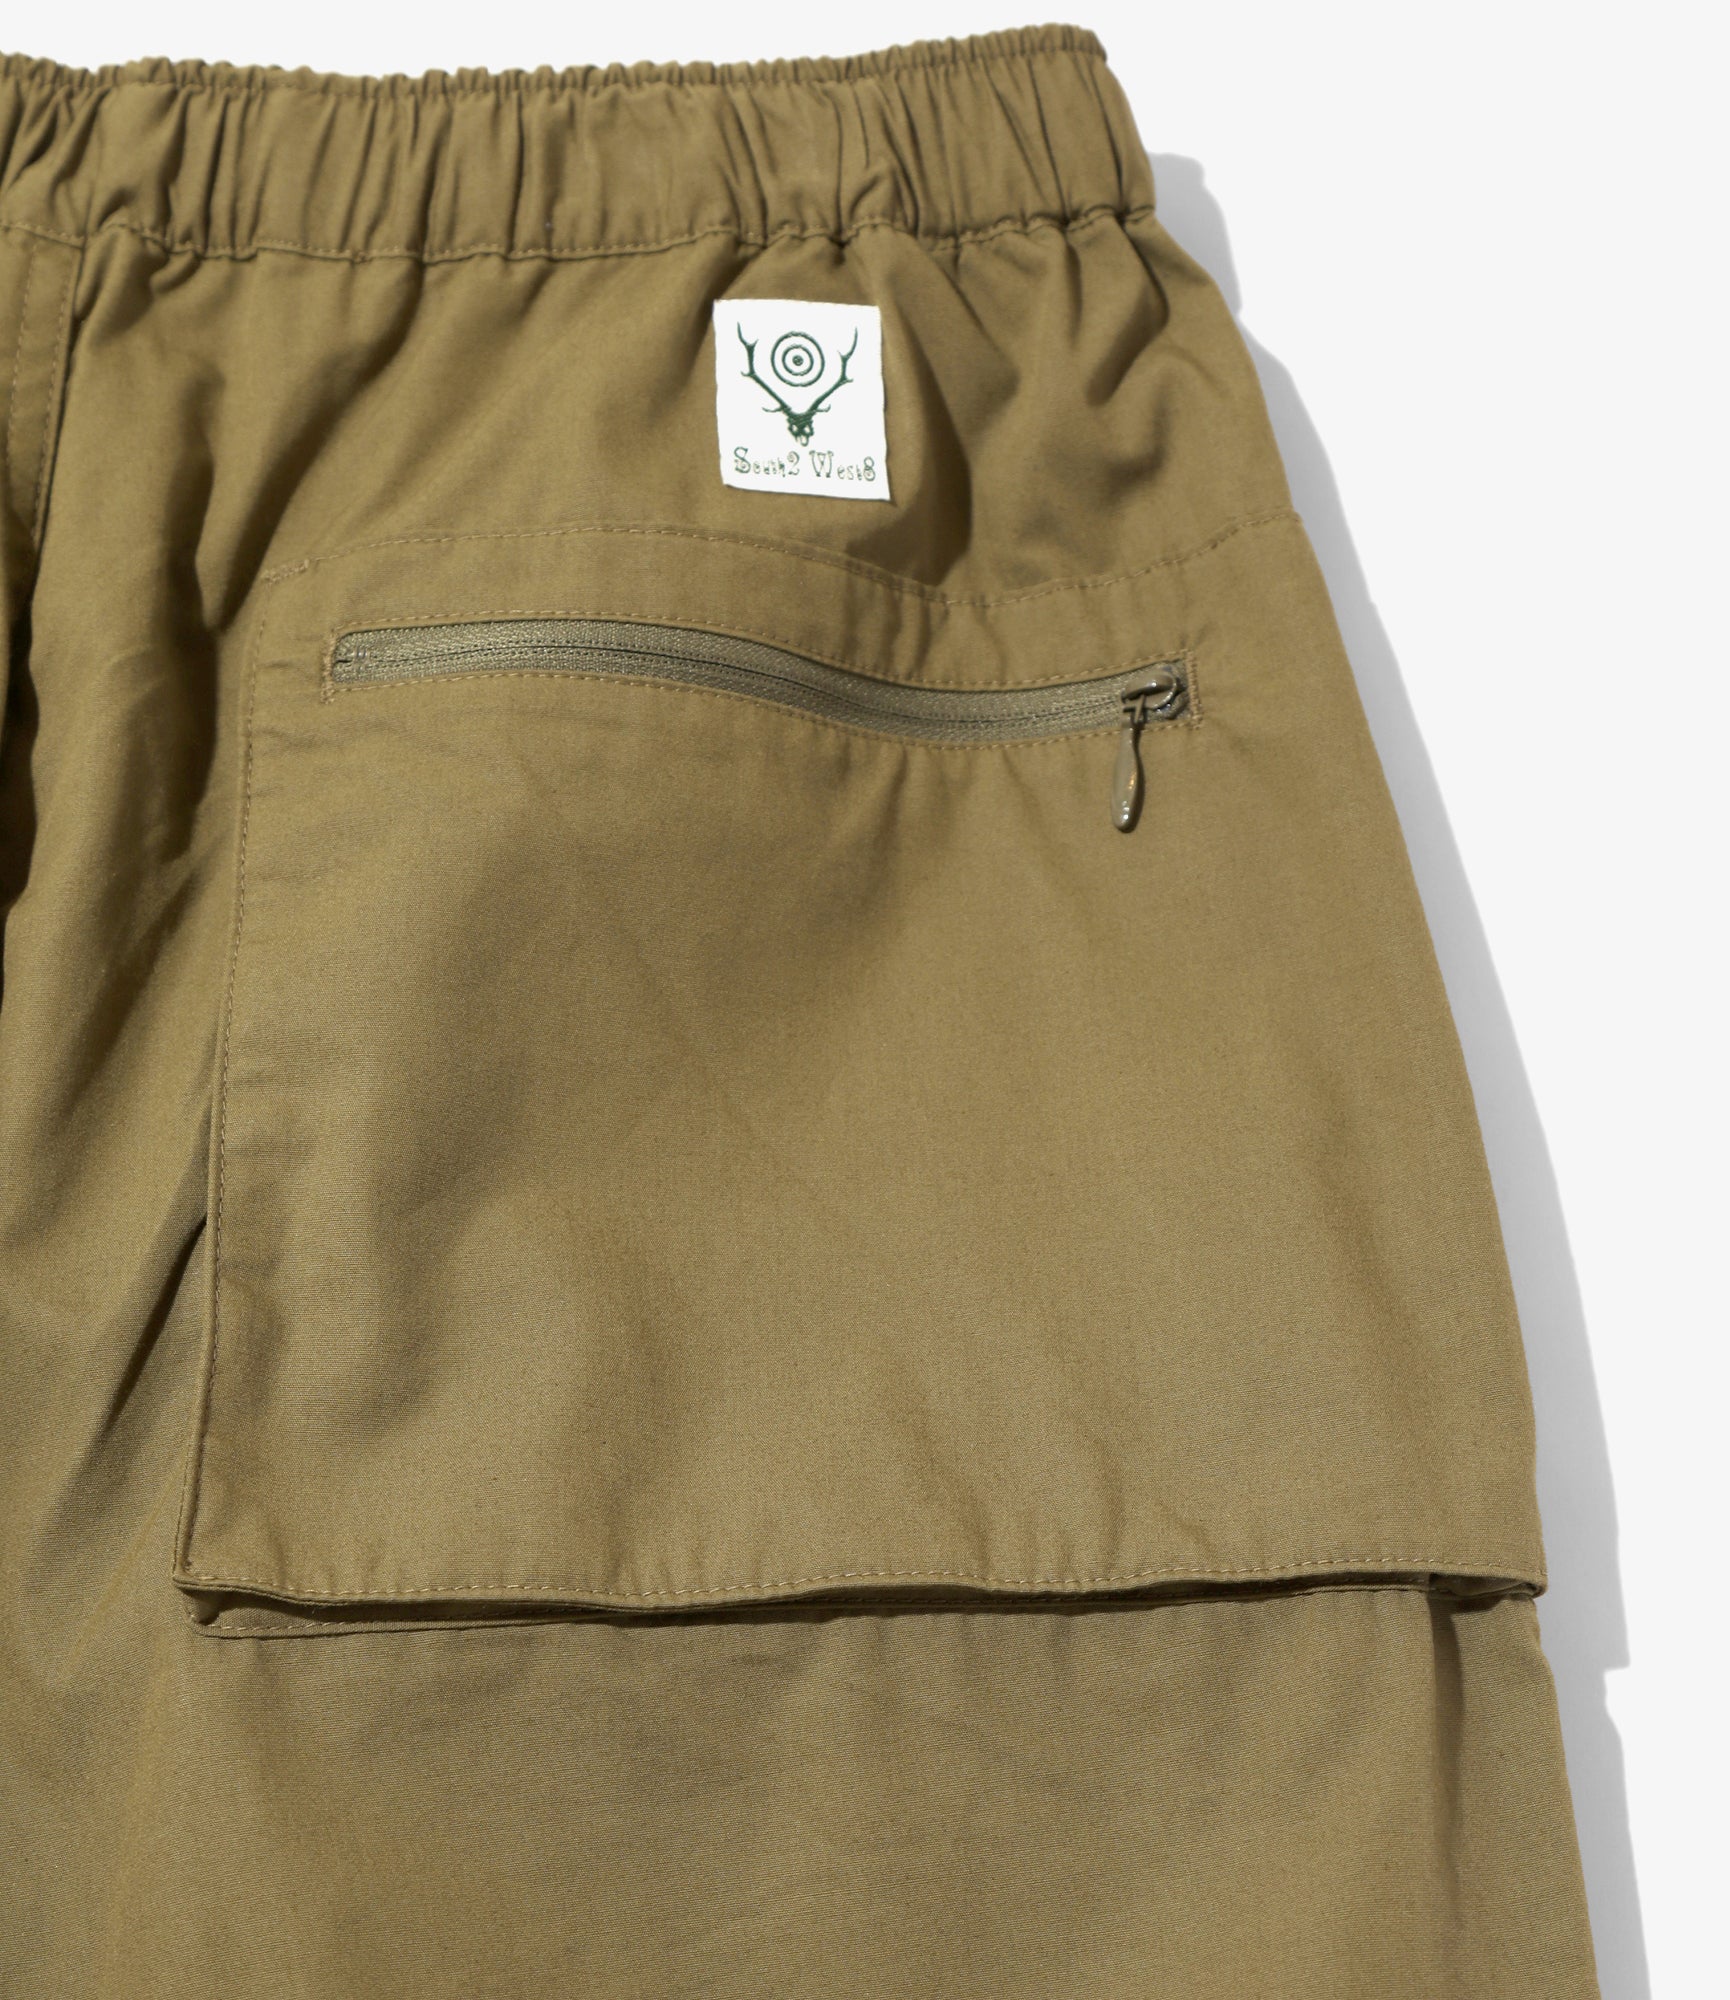 South2 West8 Belted Logger Pant - C/MO Weather Cloth - Olive